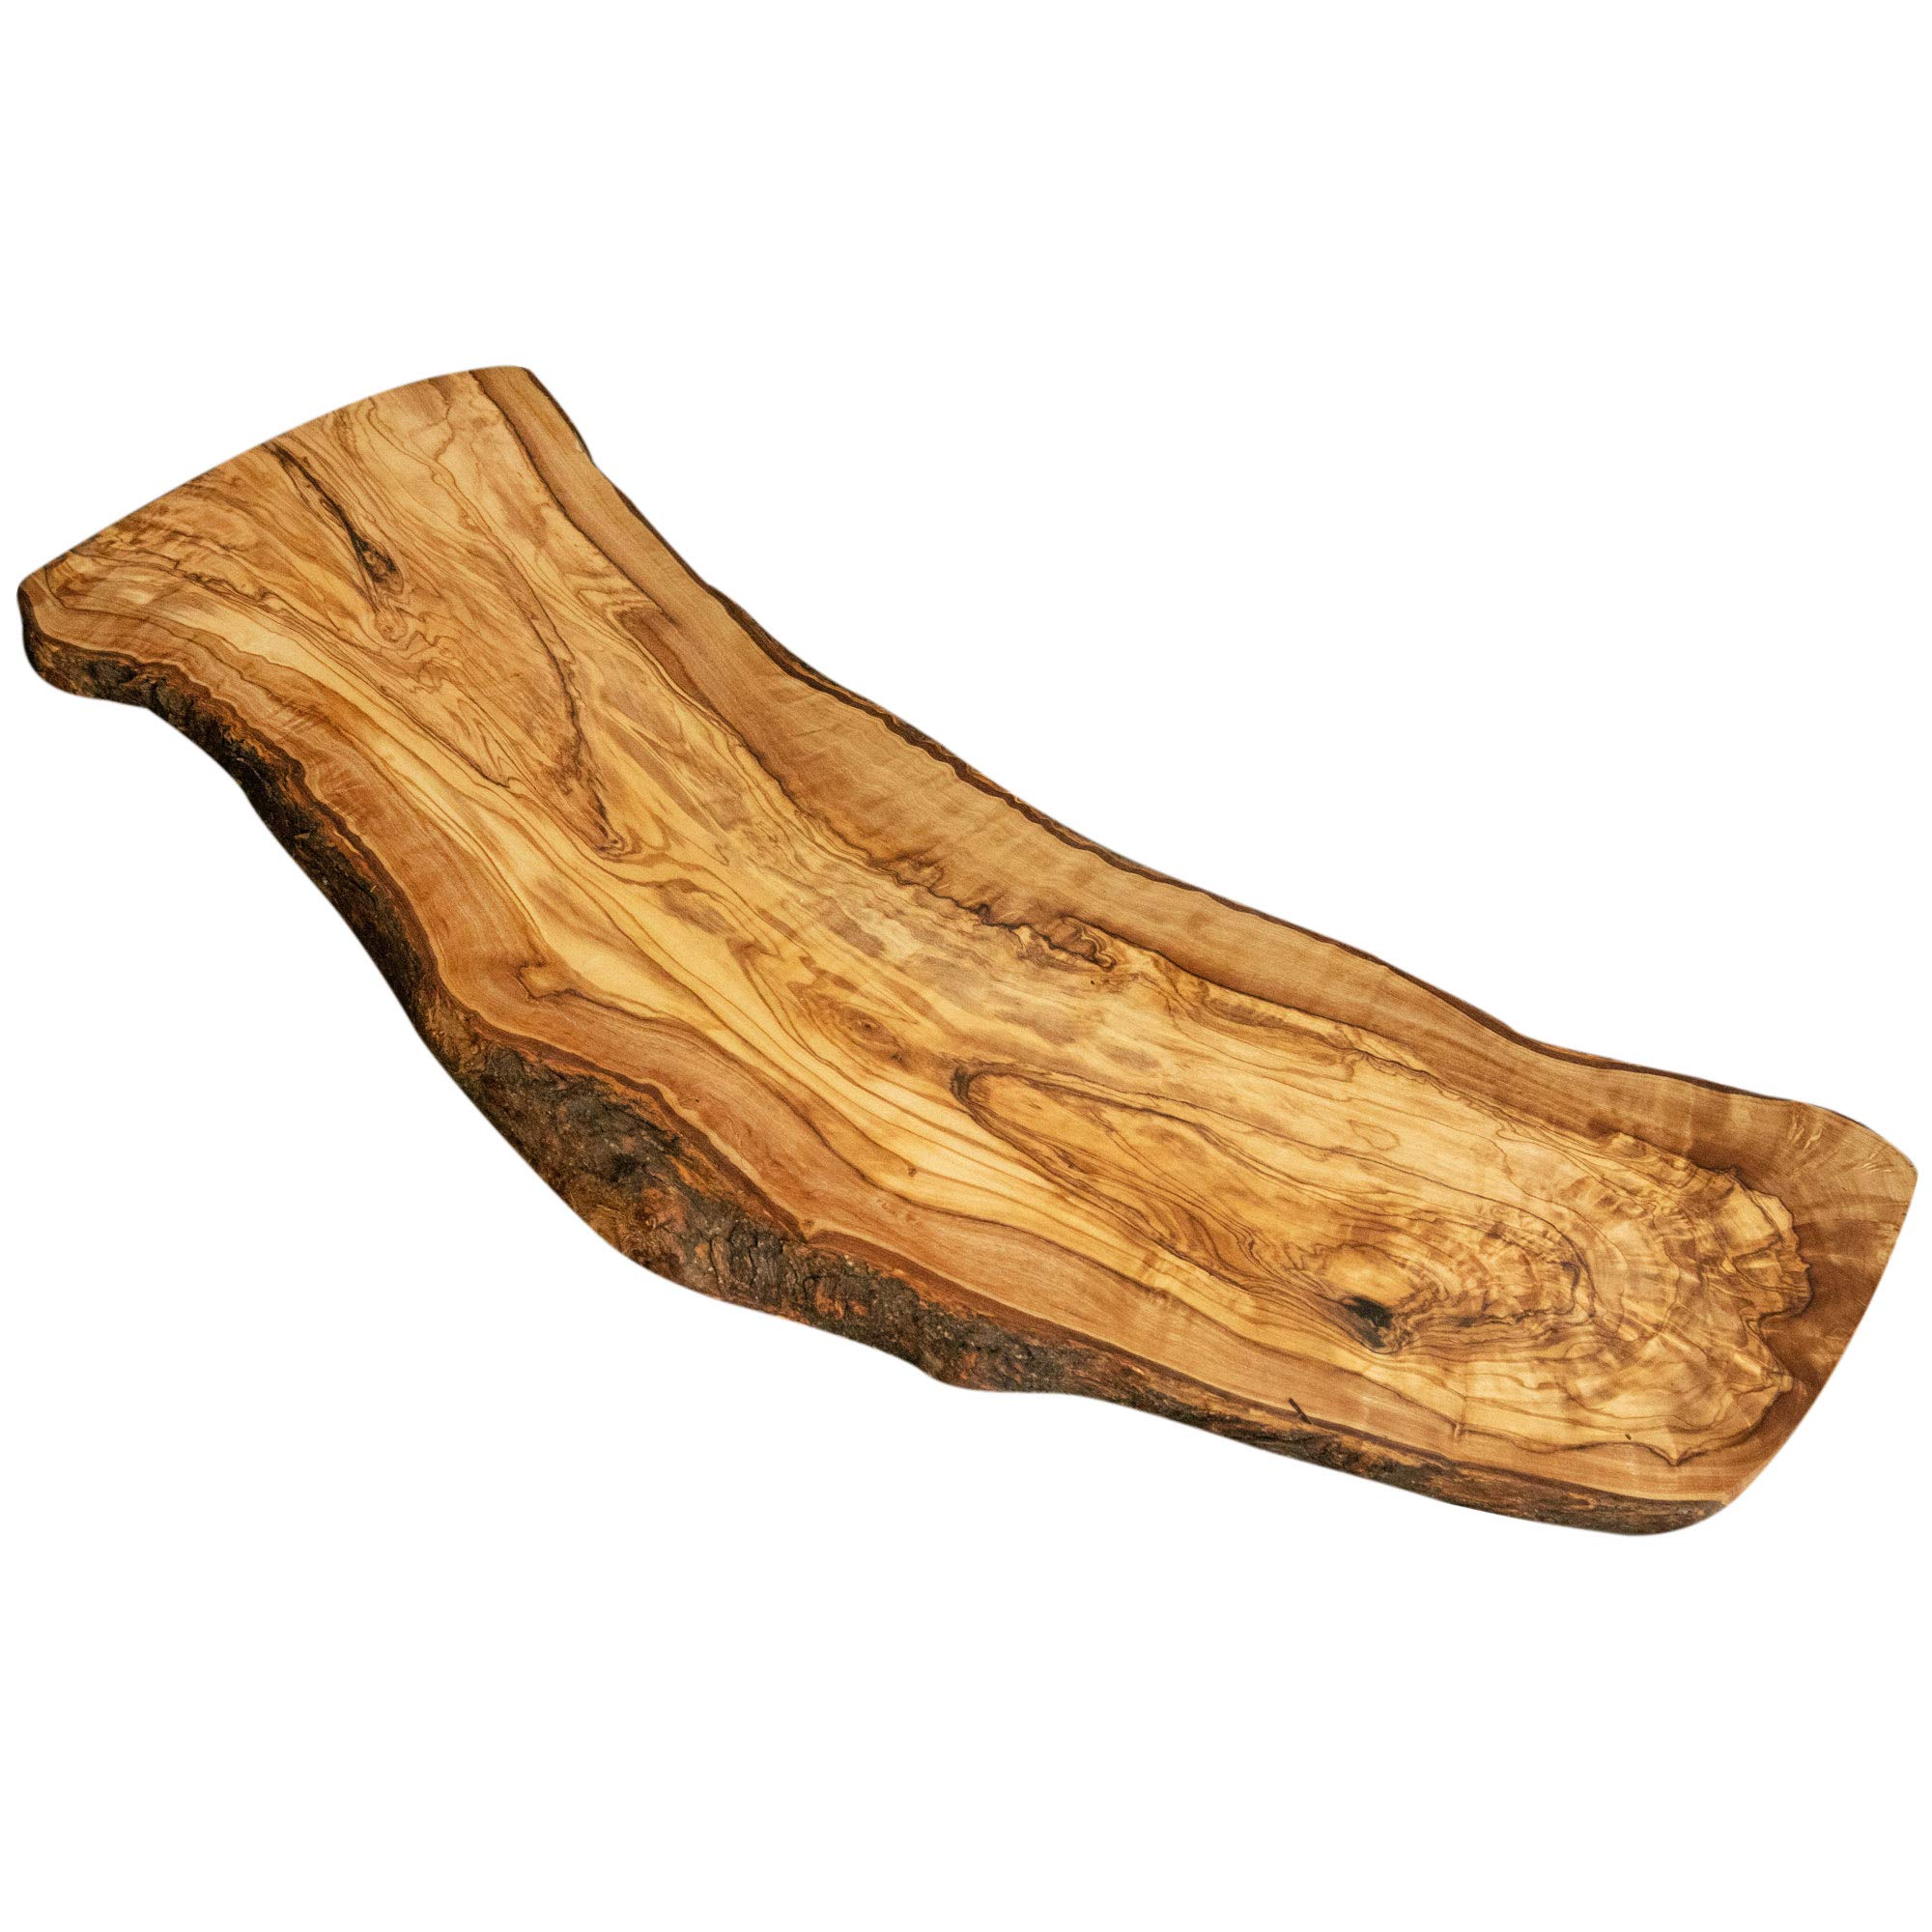 Tramanto Long Cheese Board 24 Inch Olive Wood Luxury Server, Live Bark with Raw Edge